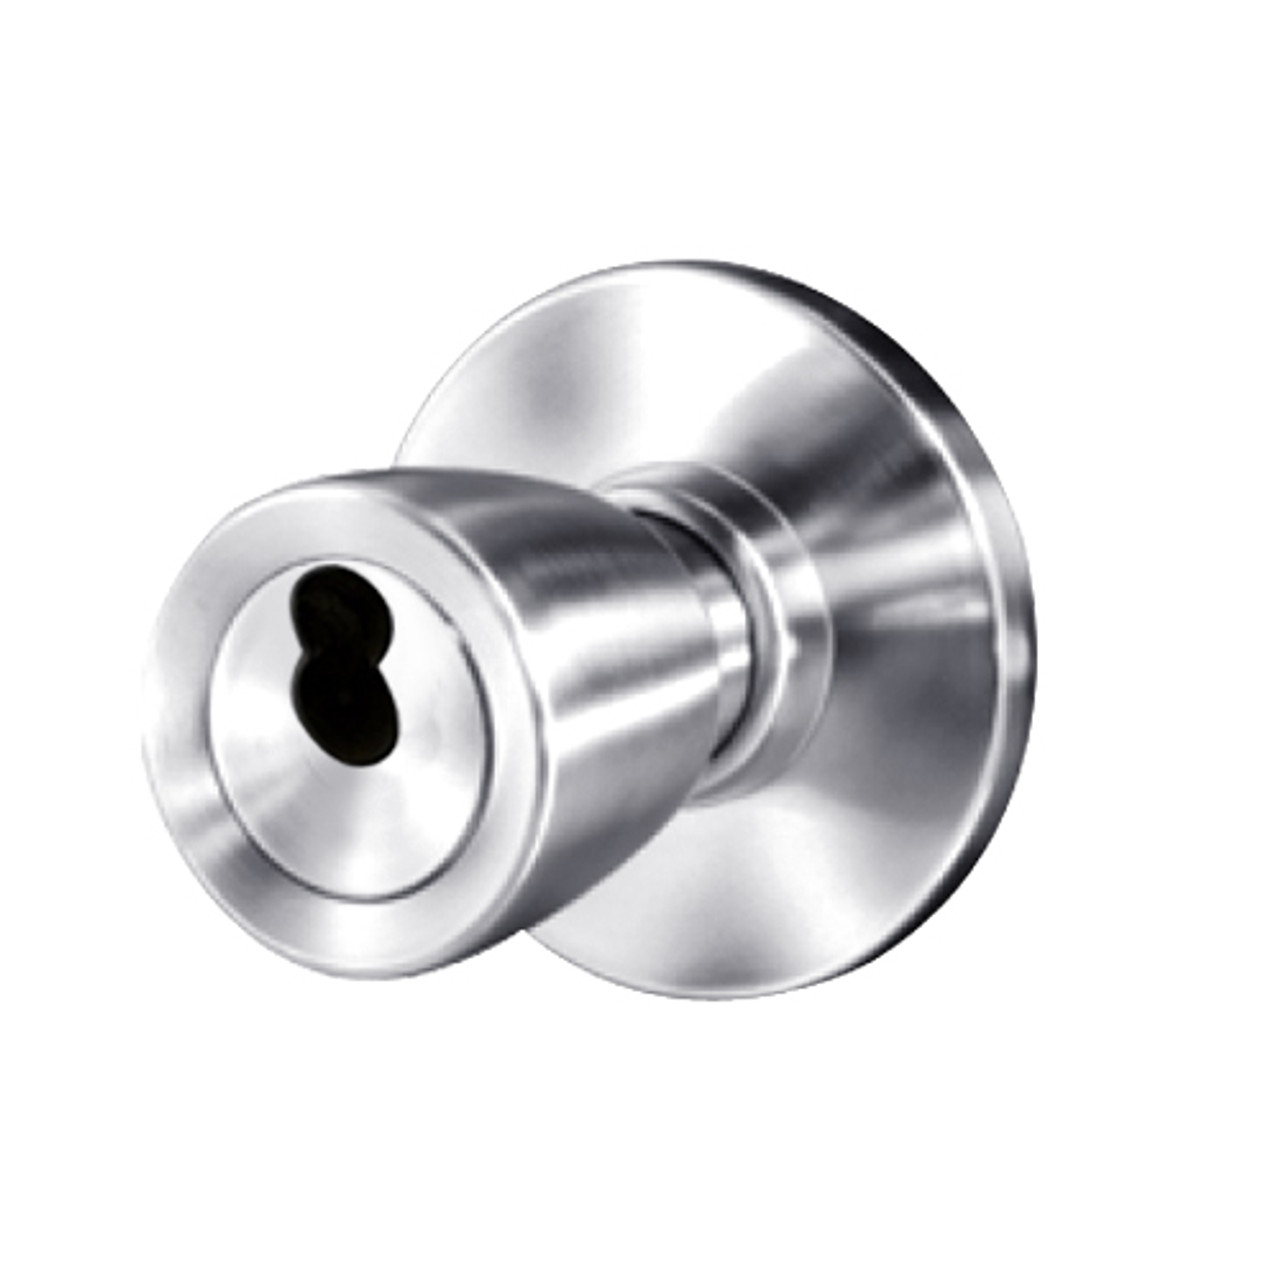 8K47YR6AS3625 Best 8K Series Exit Heavy Duty Cylindrical Knob Locks with Tulip Style in Bright Chrome